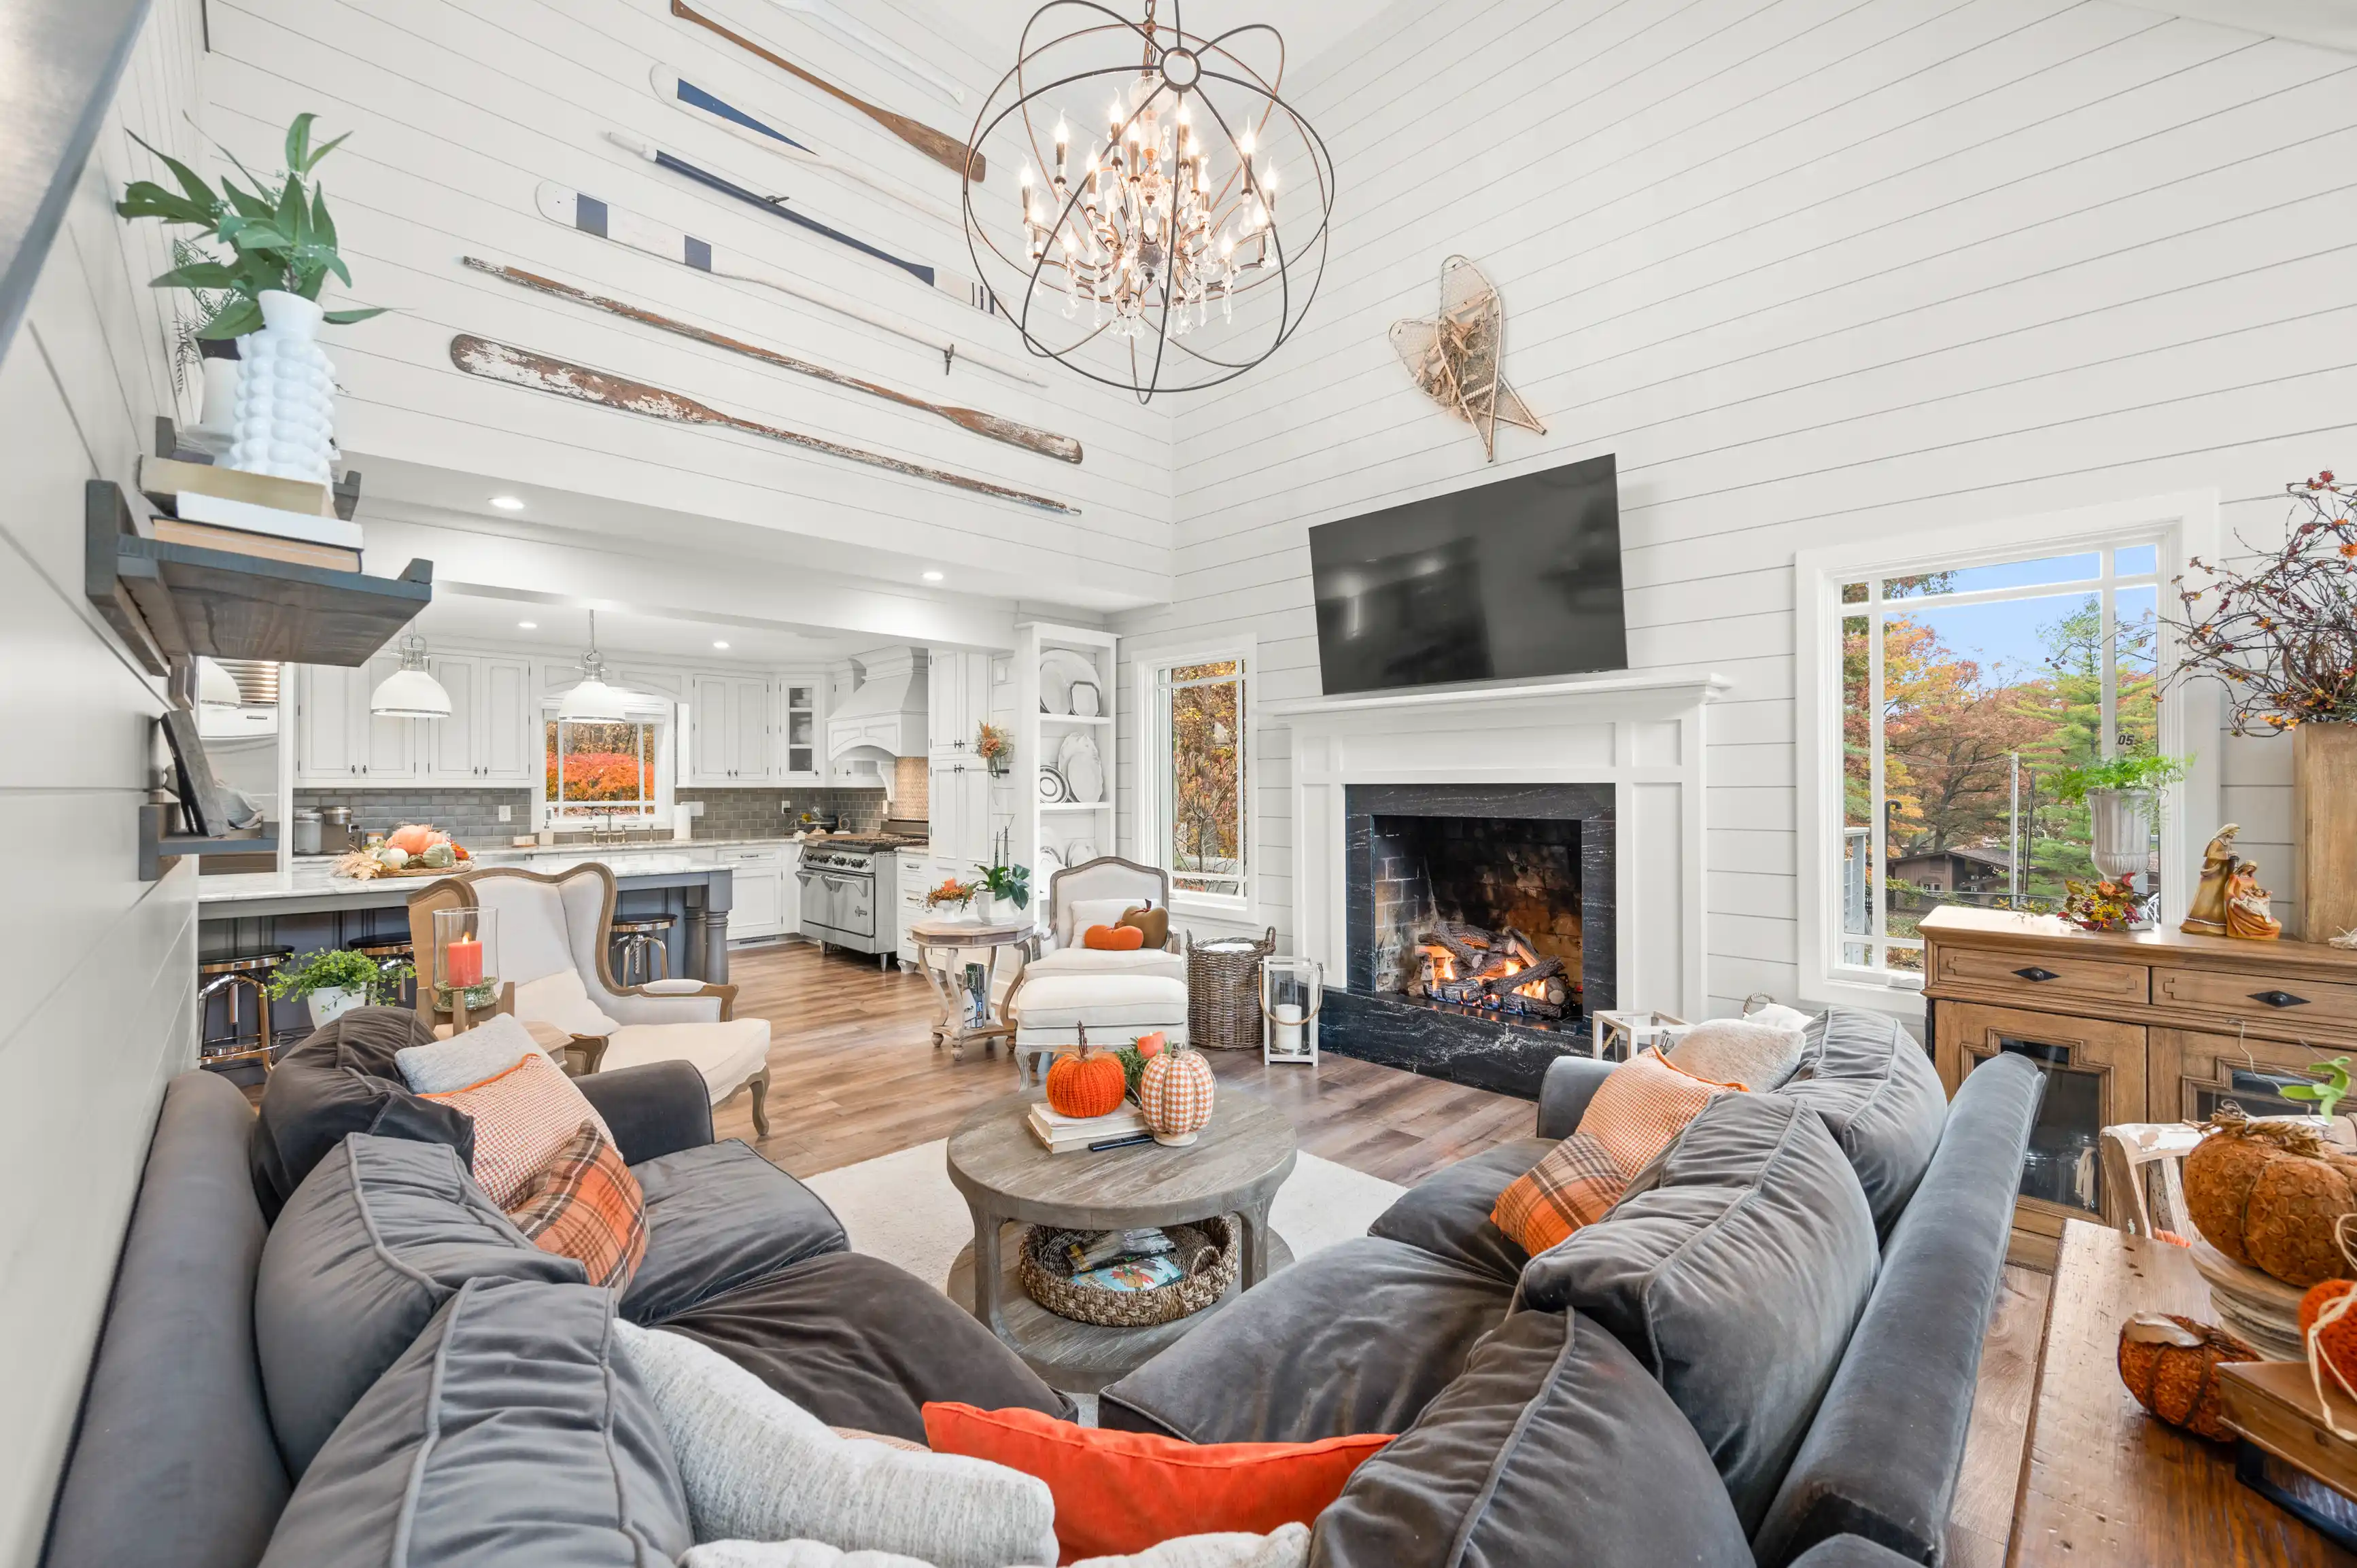 Spacious, bright living room with a cozy fireplace, comfortable seating, and an open concept kitchen in the background, decorated with warm, autumnal accents.